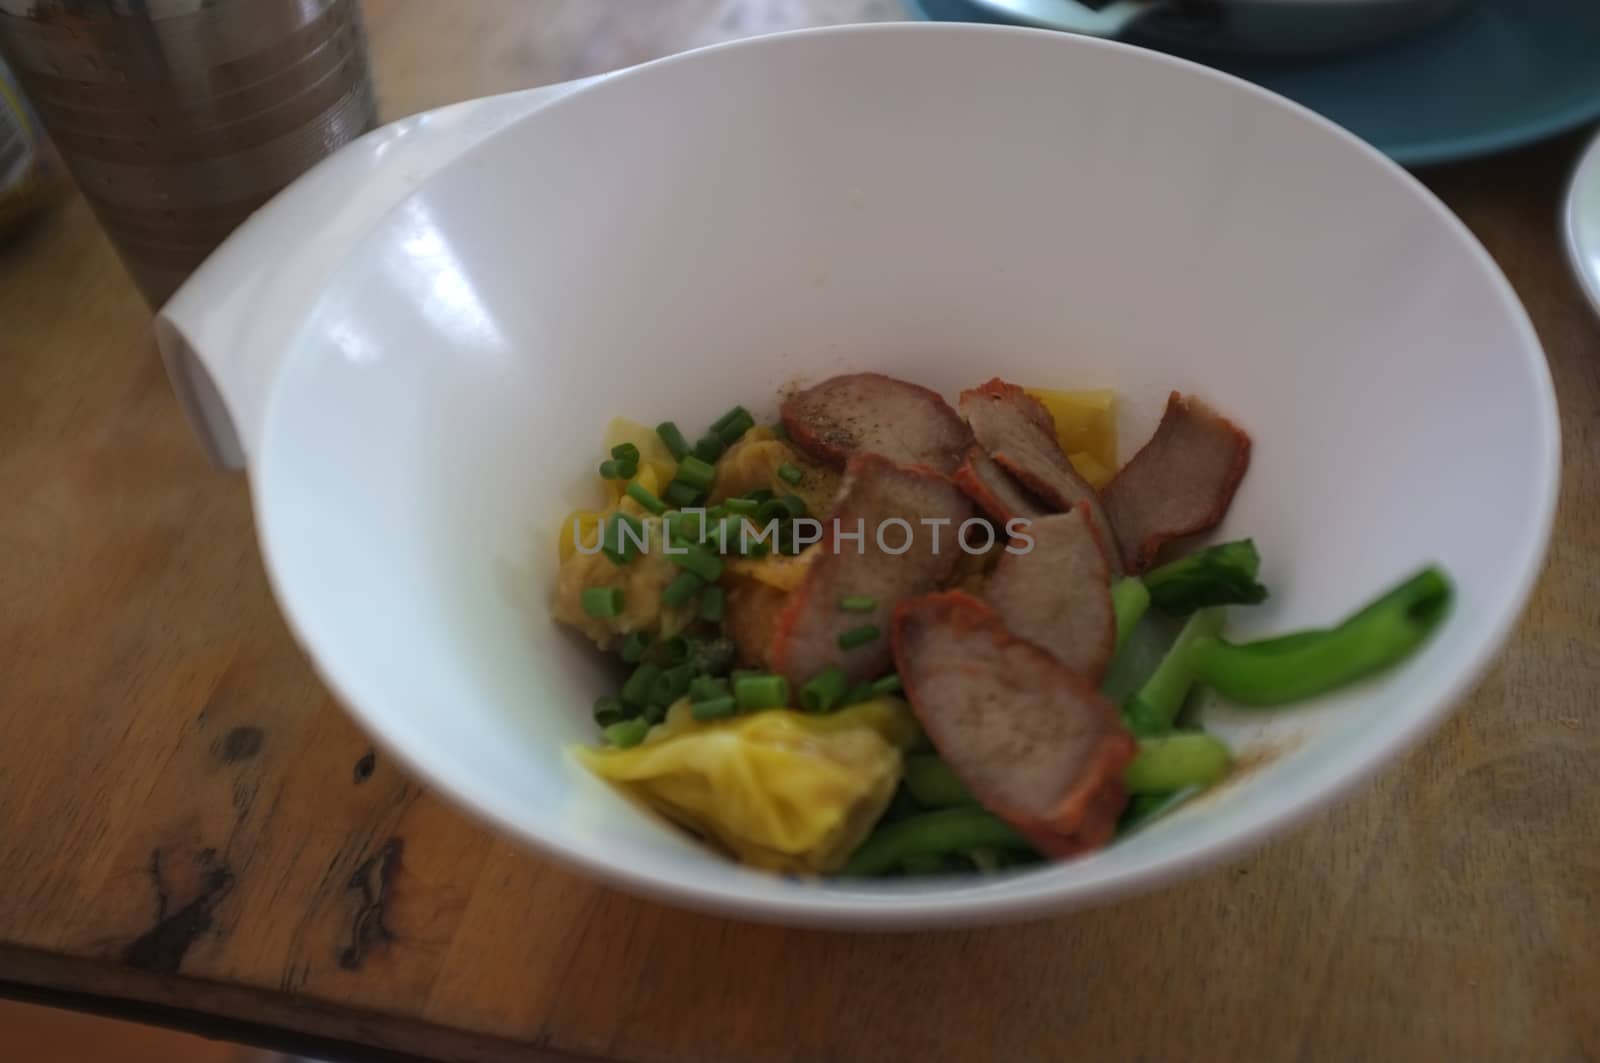 Wantan egg noodles and sliced roasted red pork . Asian street food by Hepjam